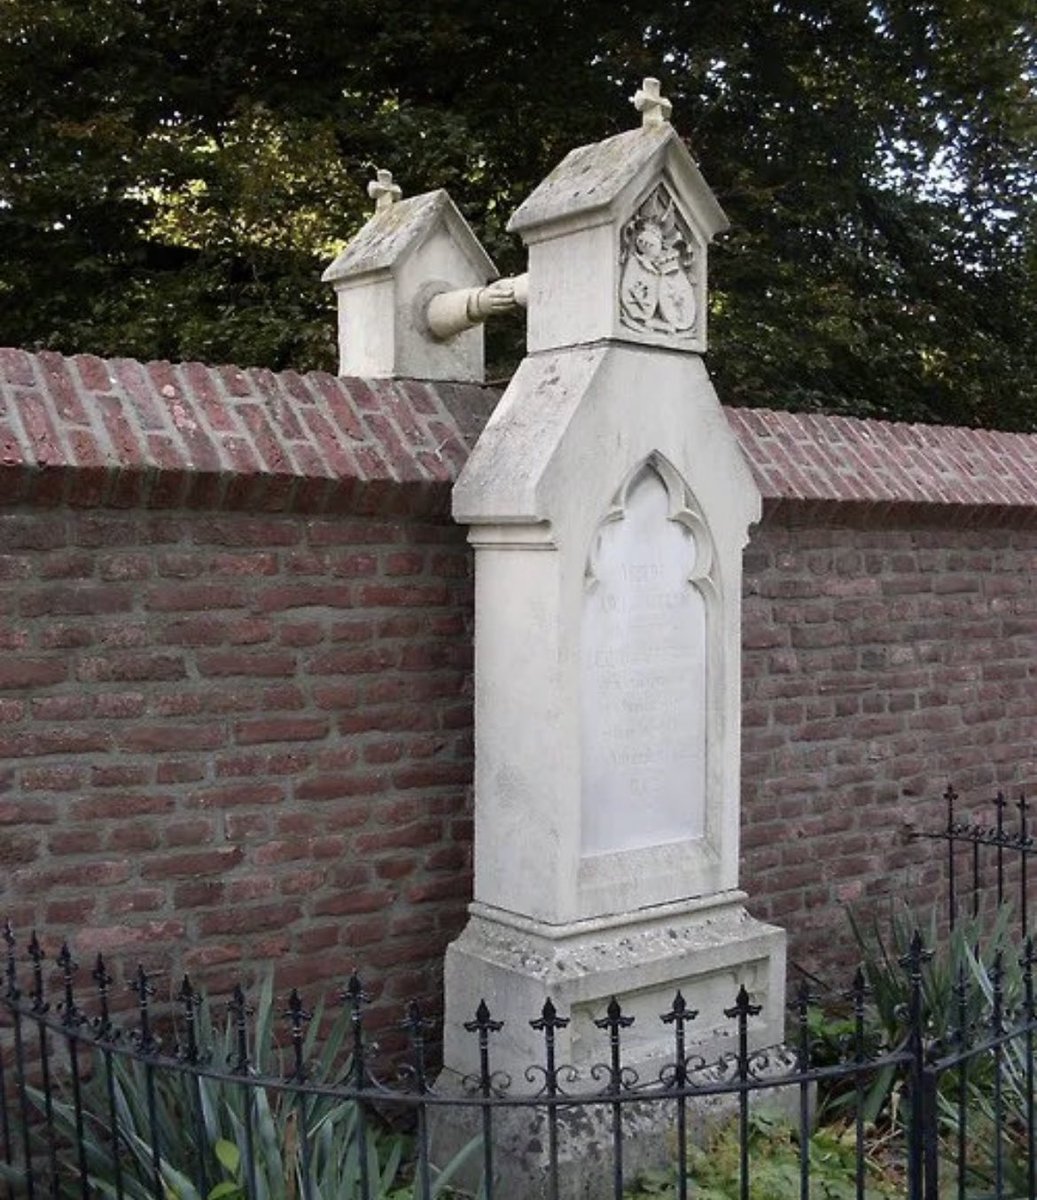 @Morbidful The graves of a Catholic woman and her Protestant husband in 1888 Holland tell a poignant tale. 

Colonel Jacobus Warnerus Constantinus van Gorkum of the Dutch Cavalry found his final resting place on the Protestant side of the Roermond Kapel cemetery in Limburg, Netherlands.